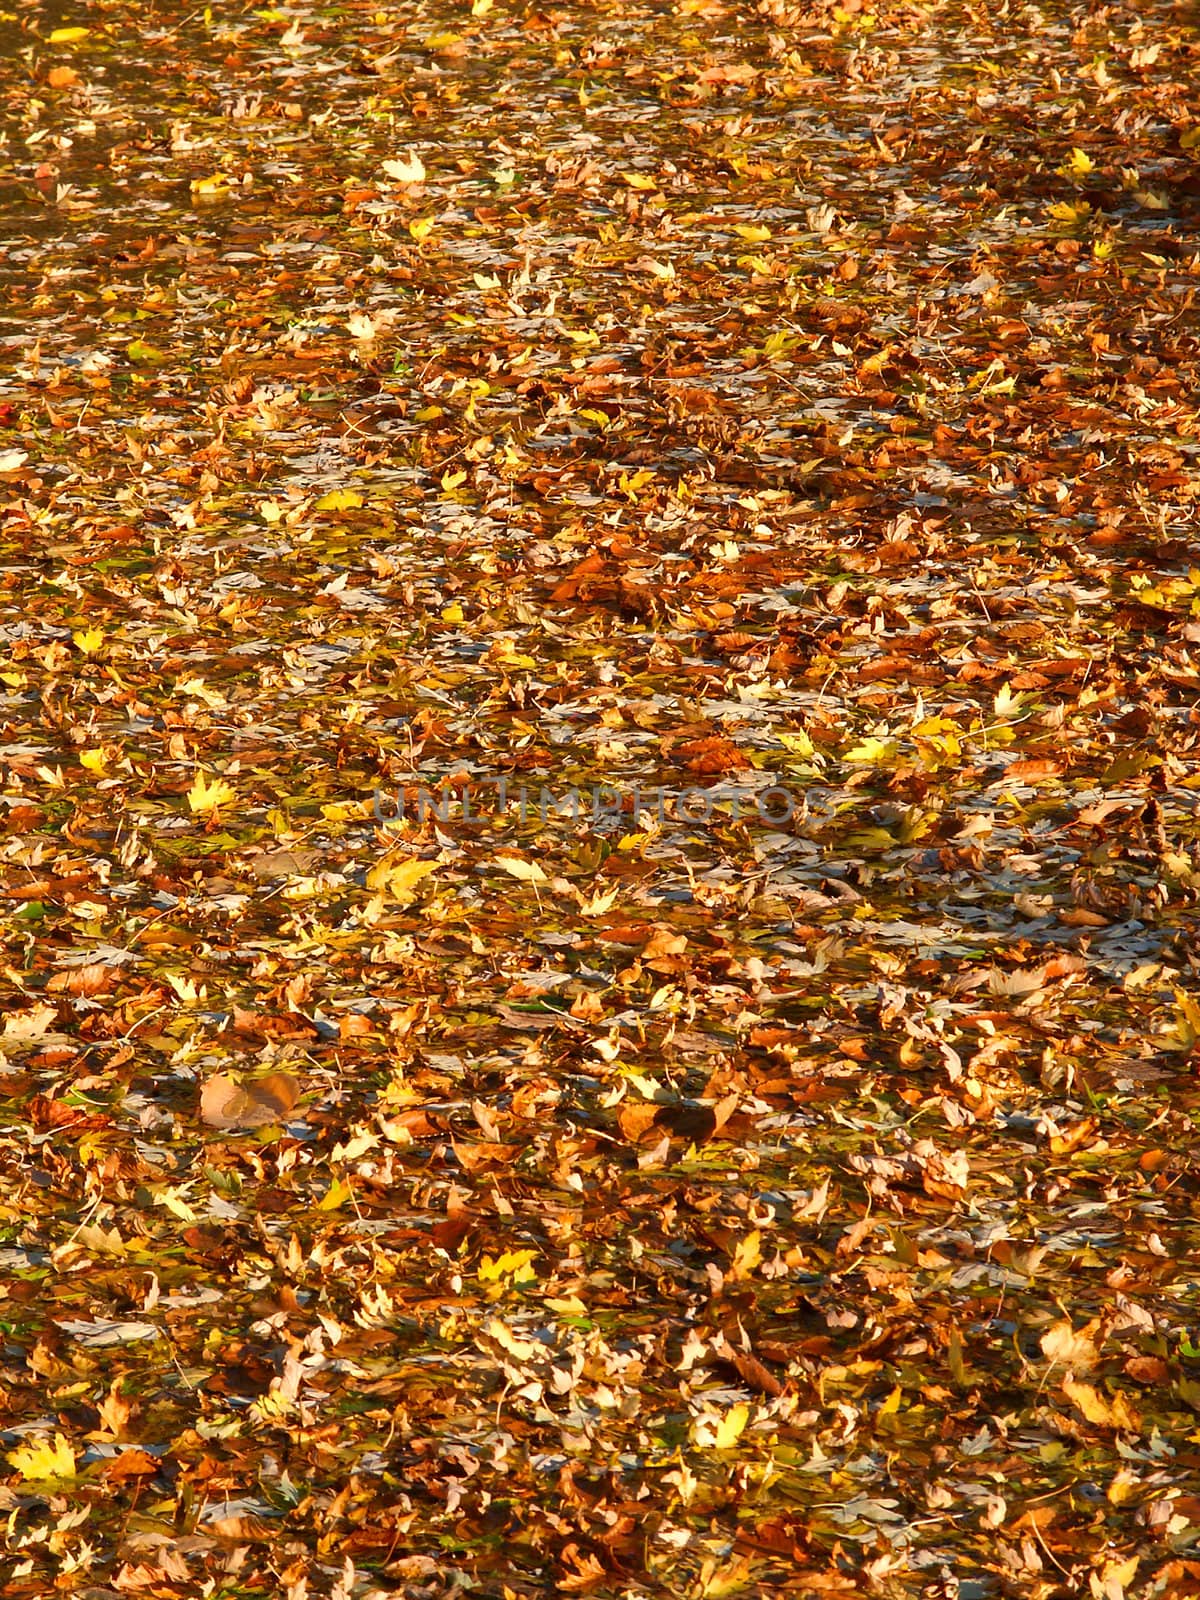 Countless autumn leaves cover the surface of the Kishwaukee River in northern Illinois.